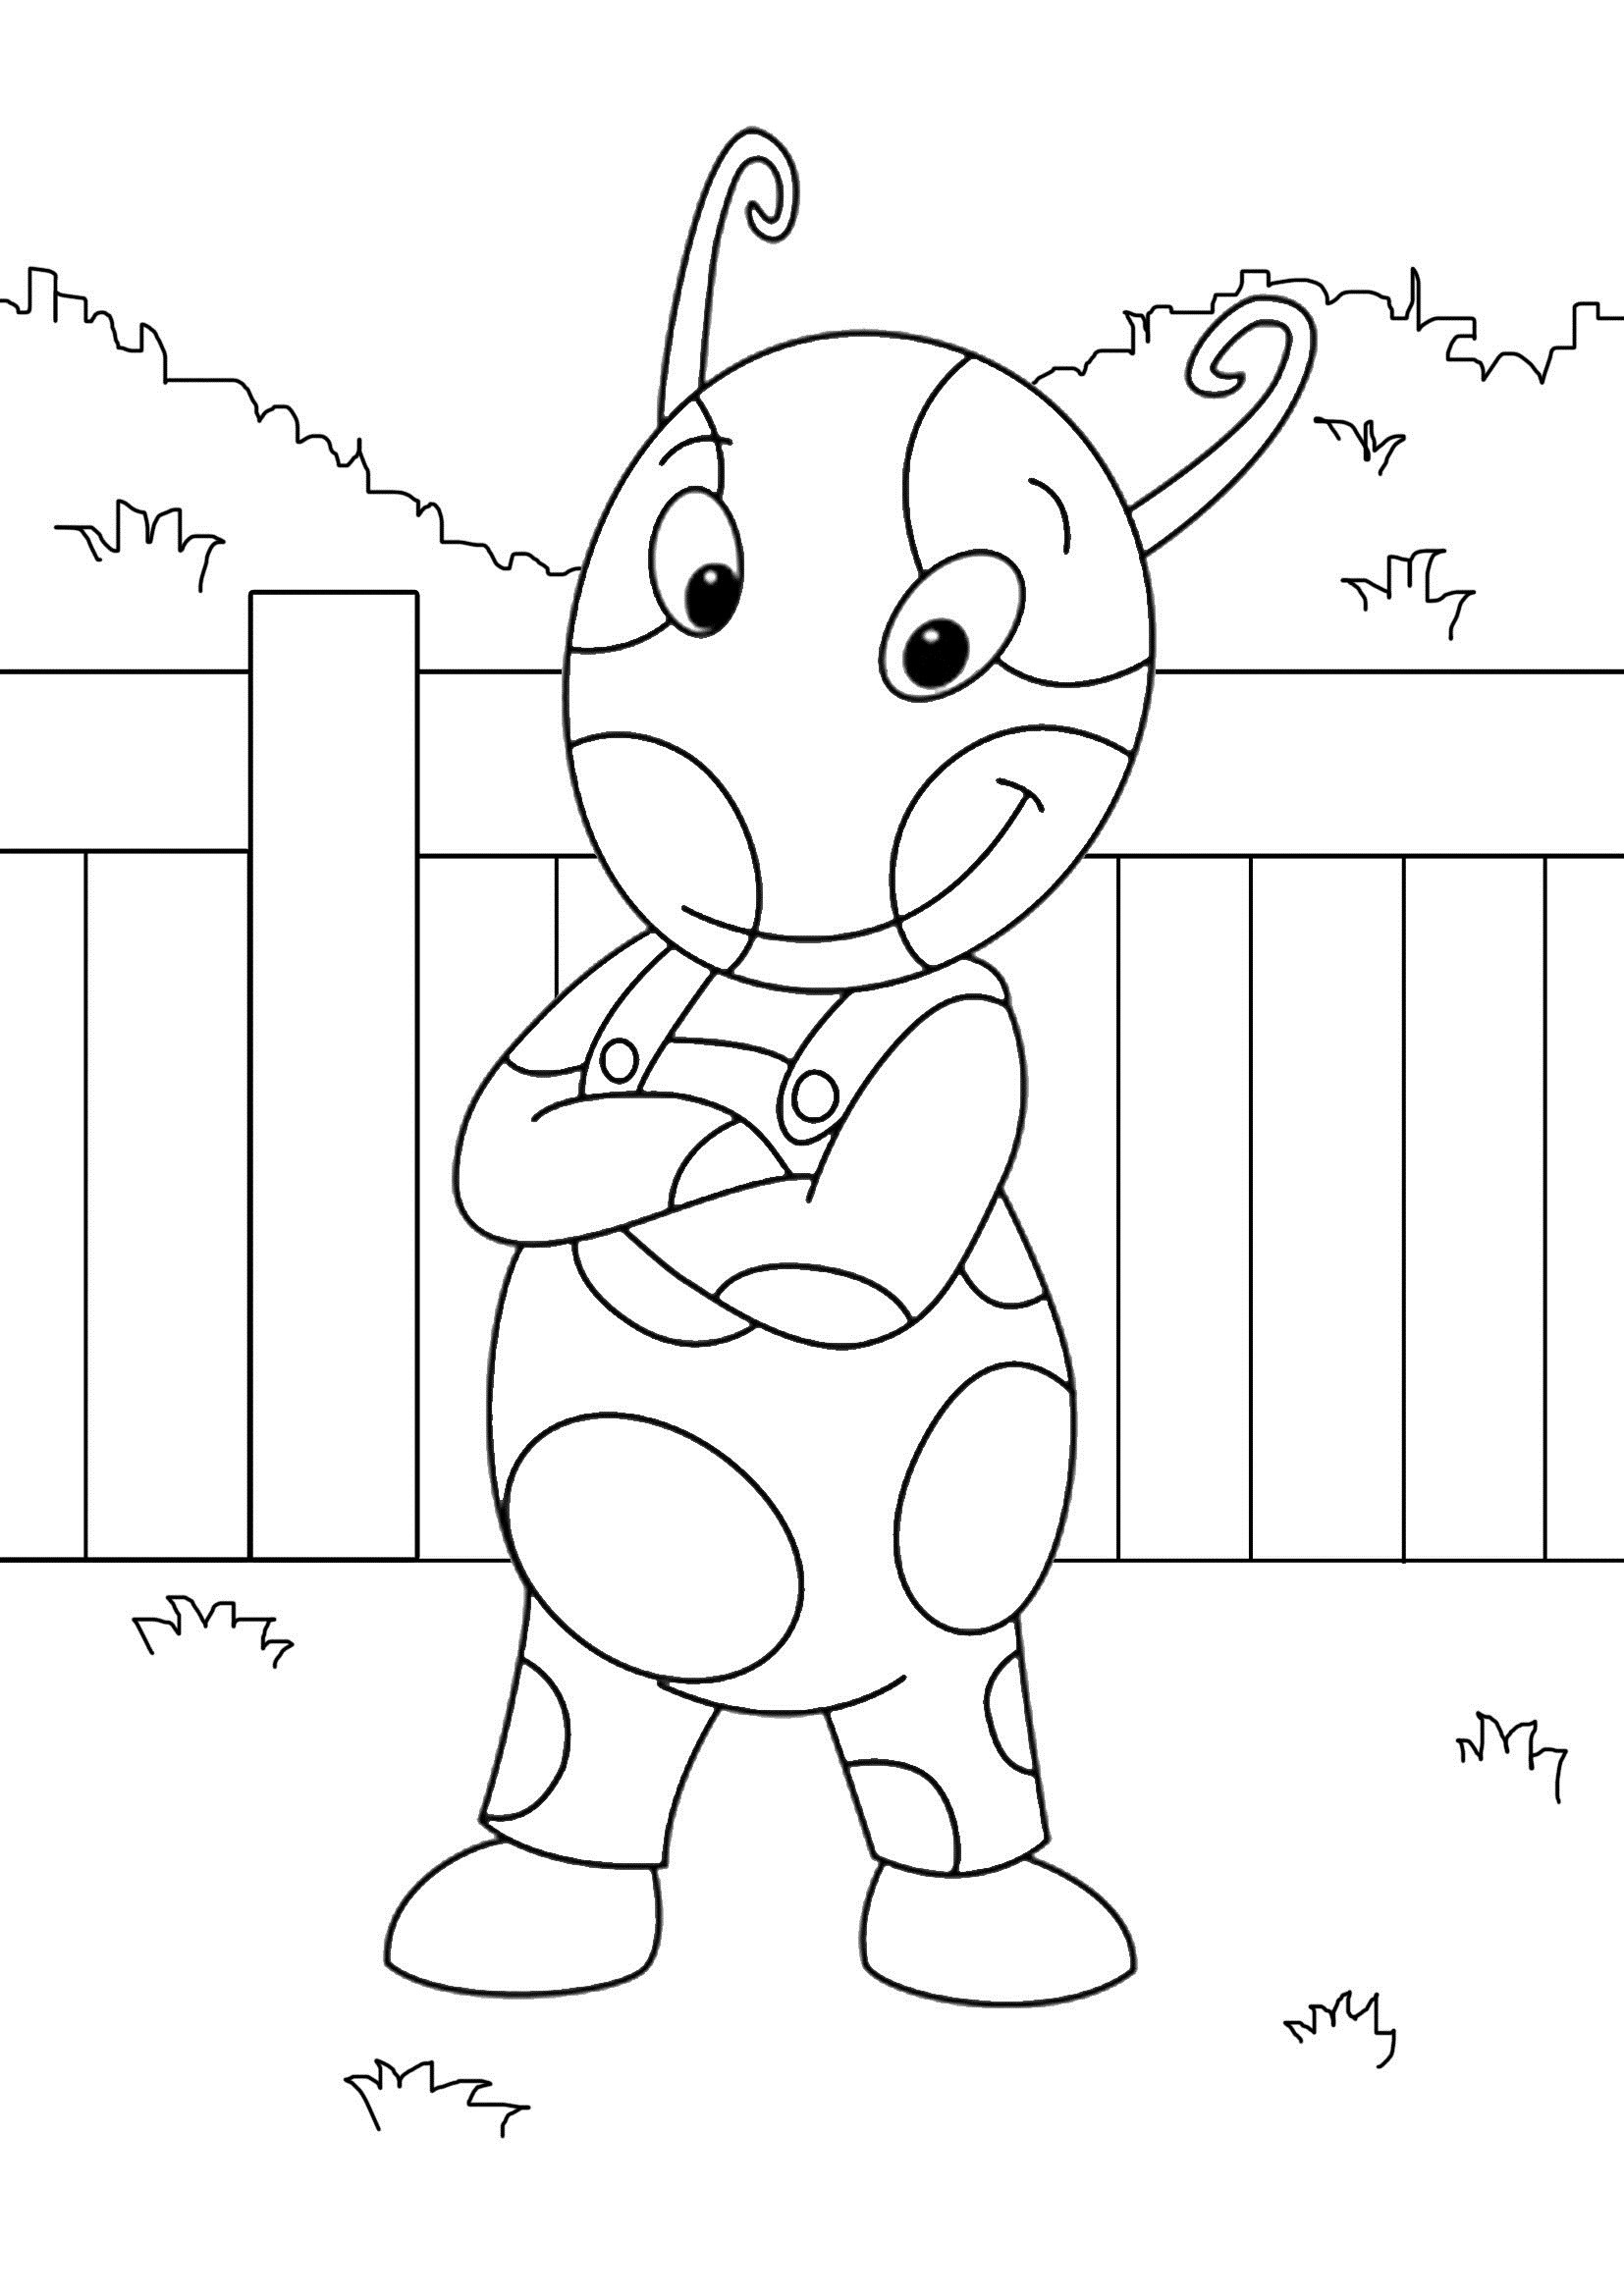 Kids Printable Coloring Pages
 Free Printable Backyardigans Coloring Pages For Kids